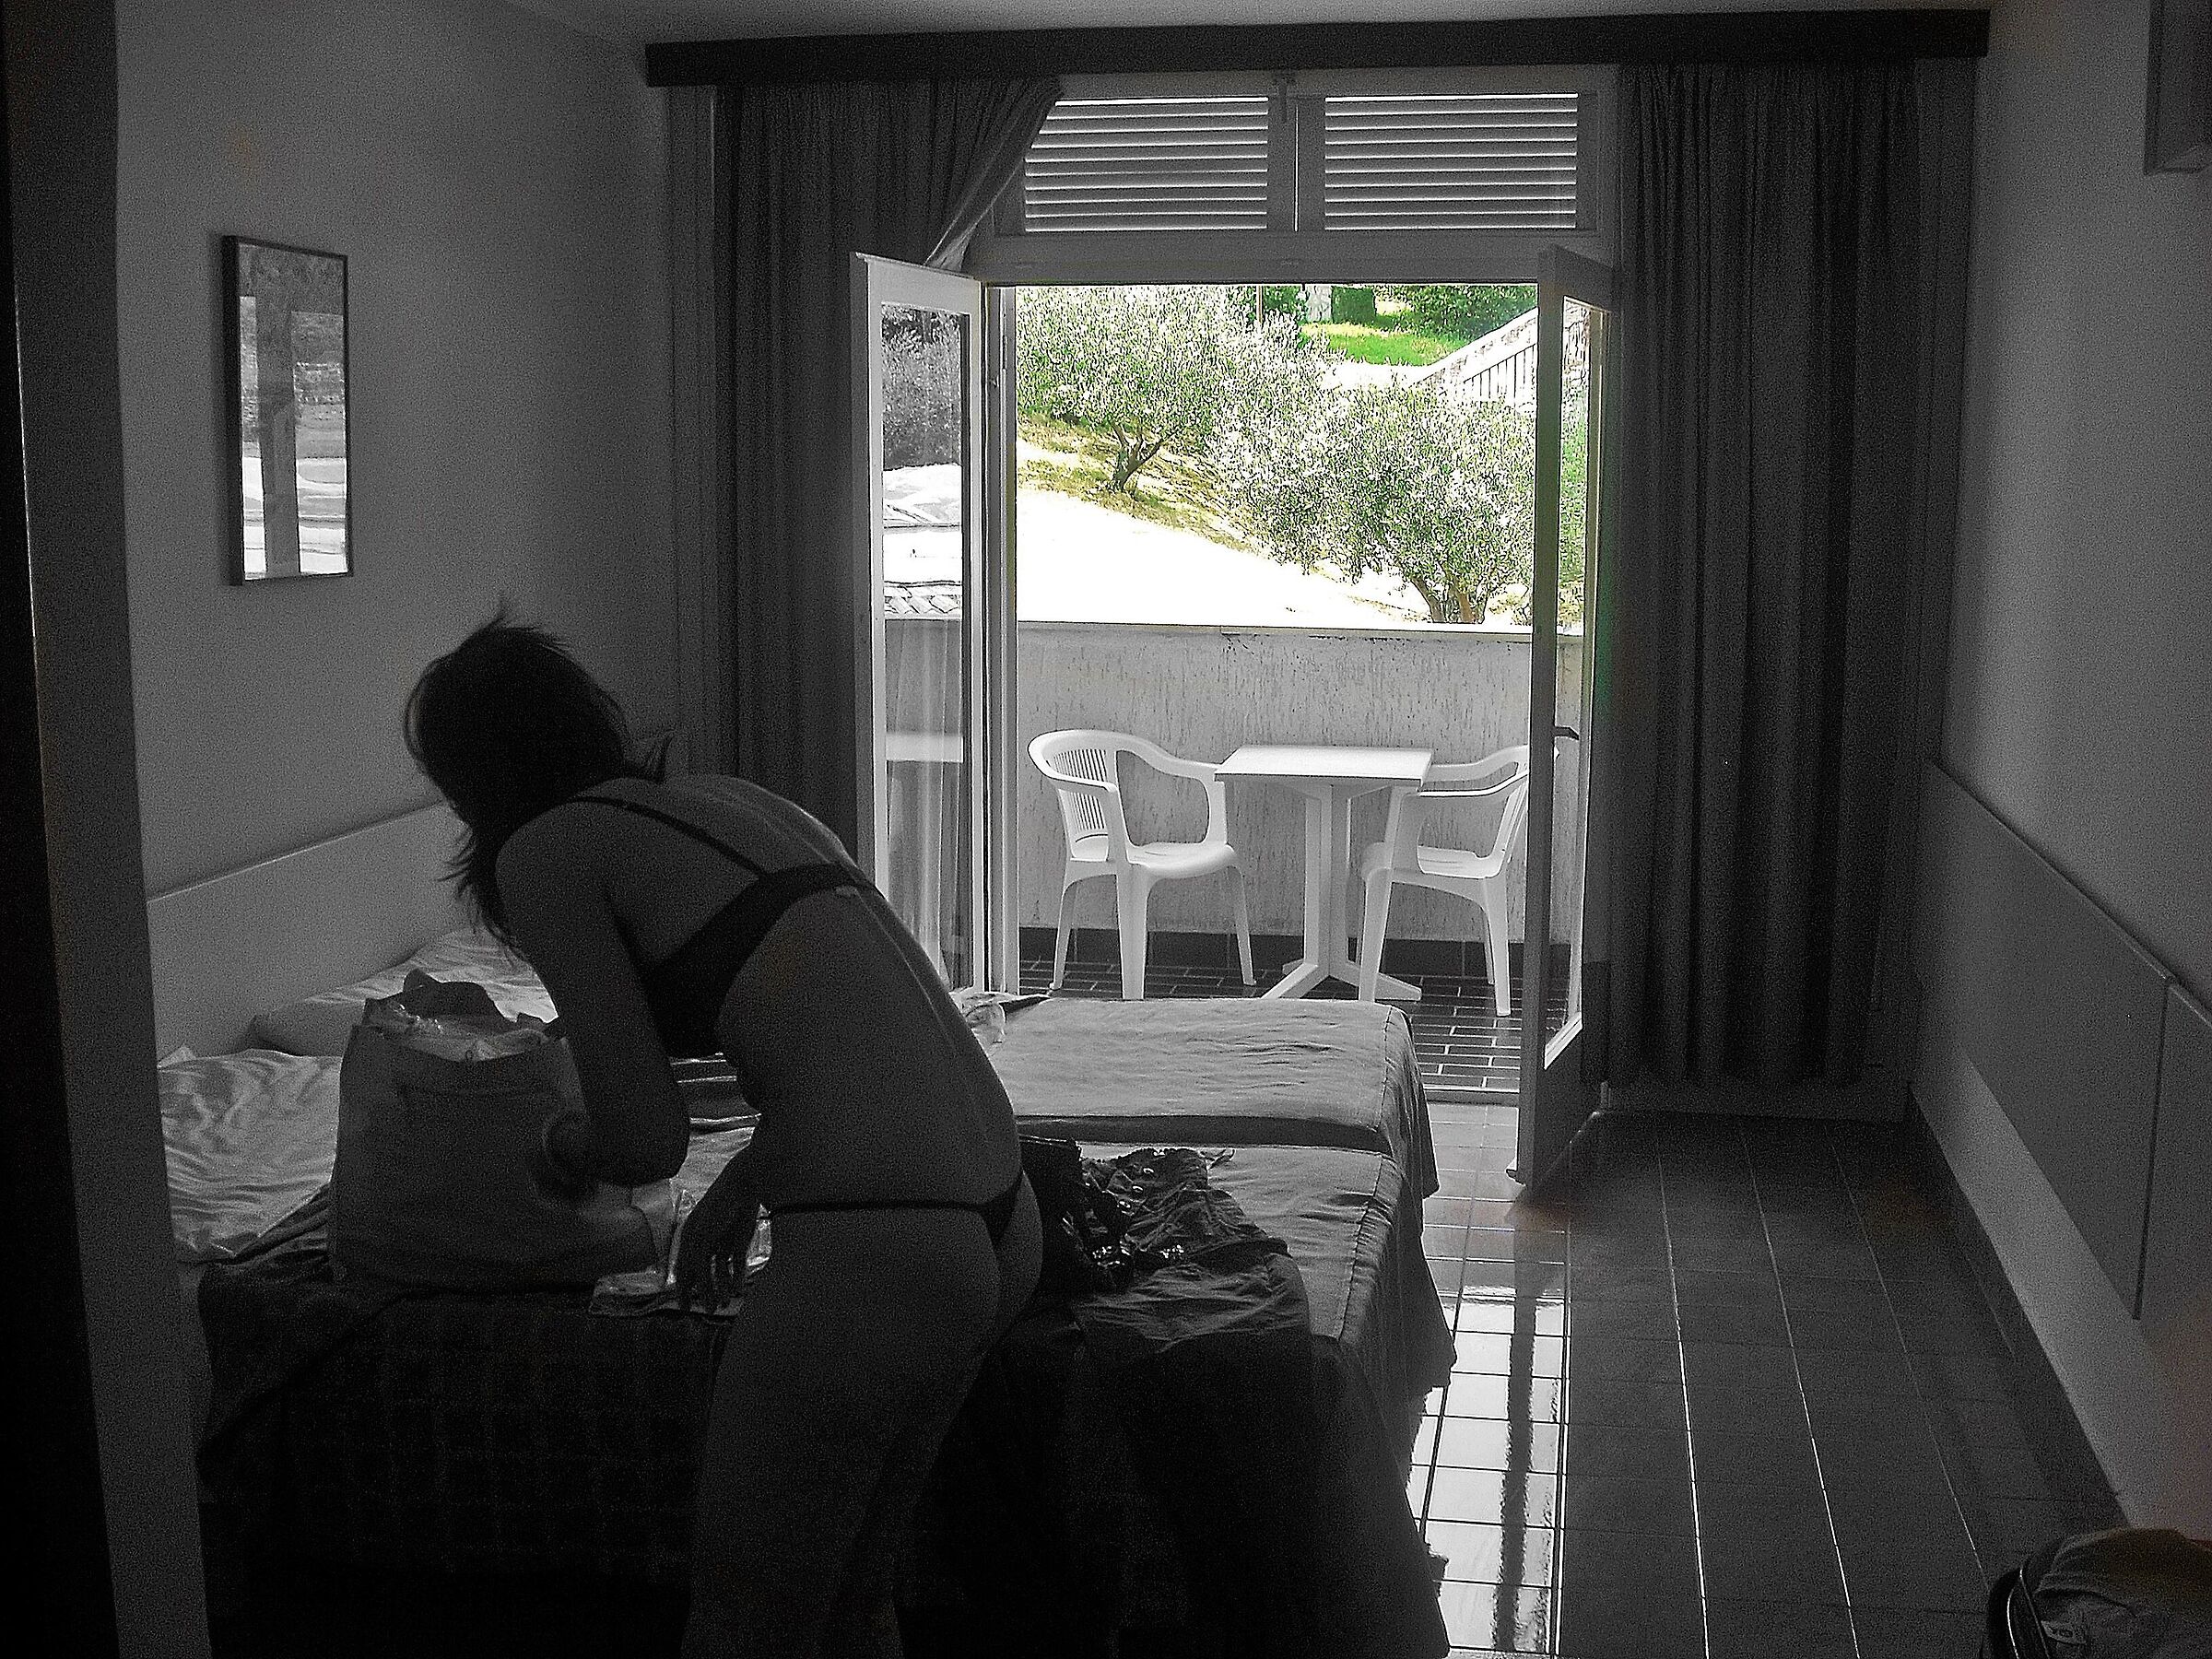 Beach holiday. Daily home moments....